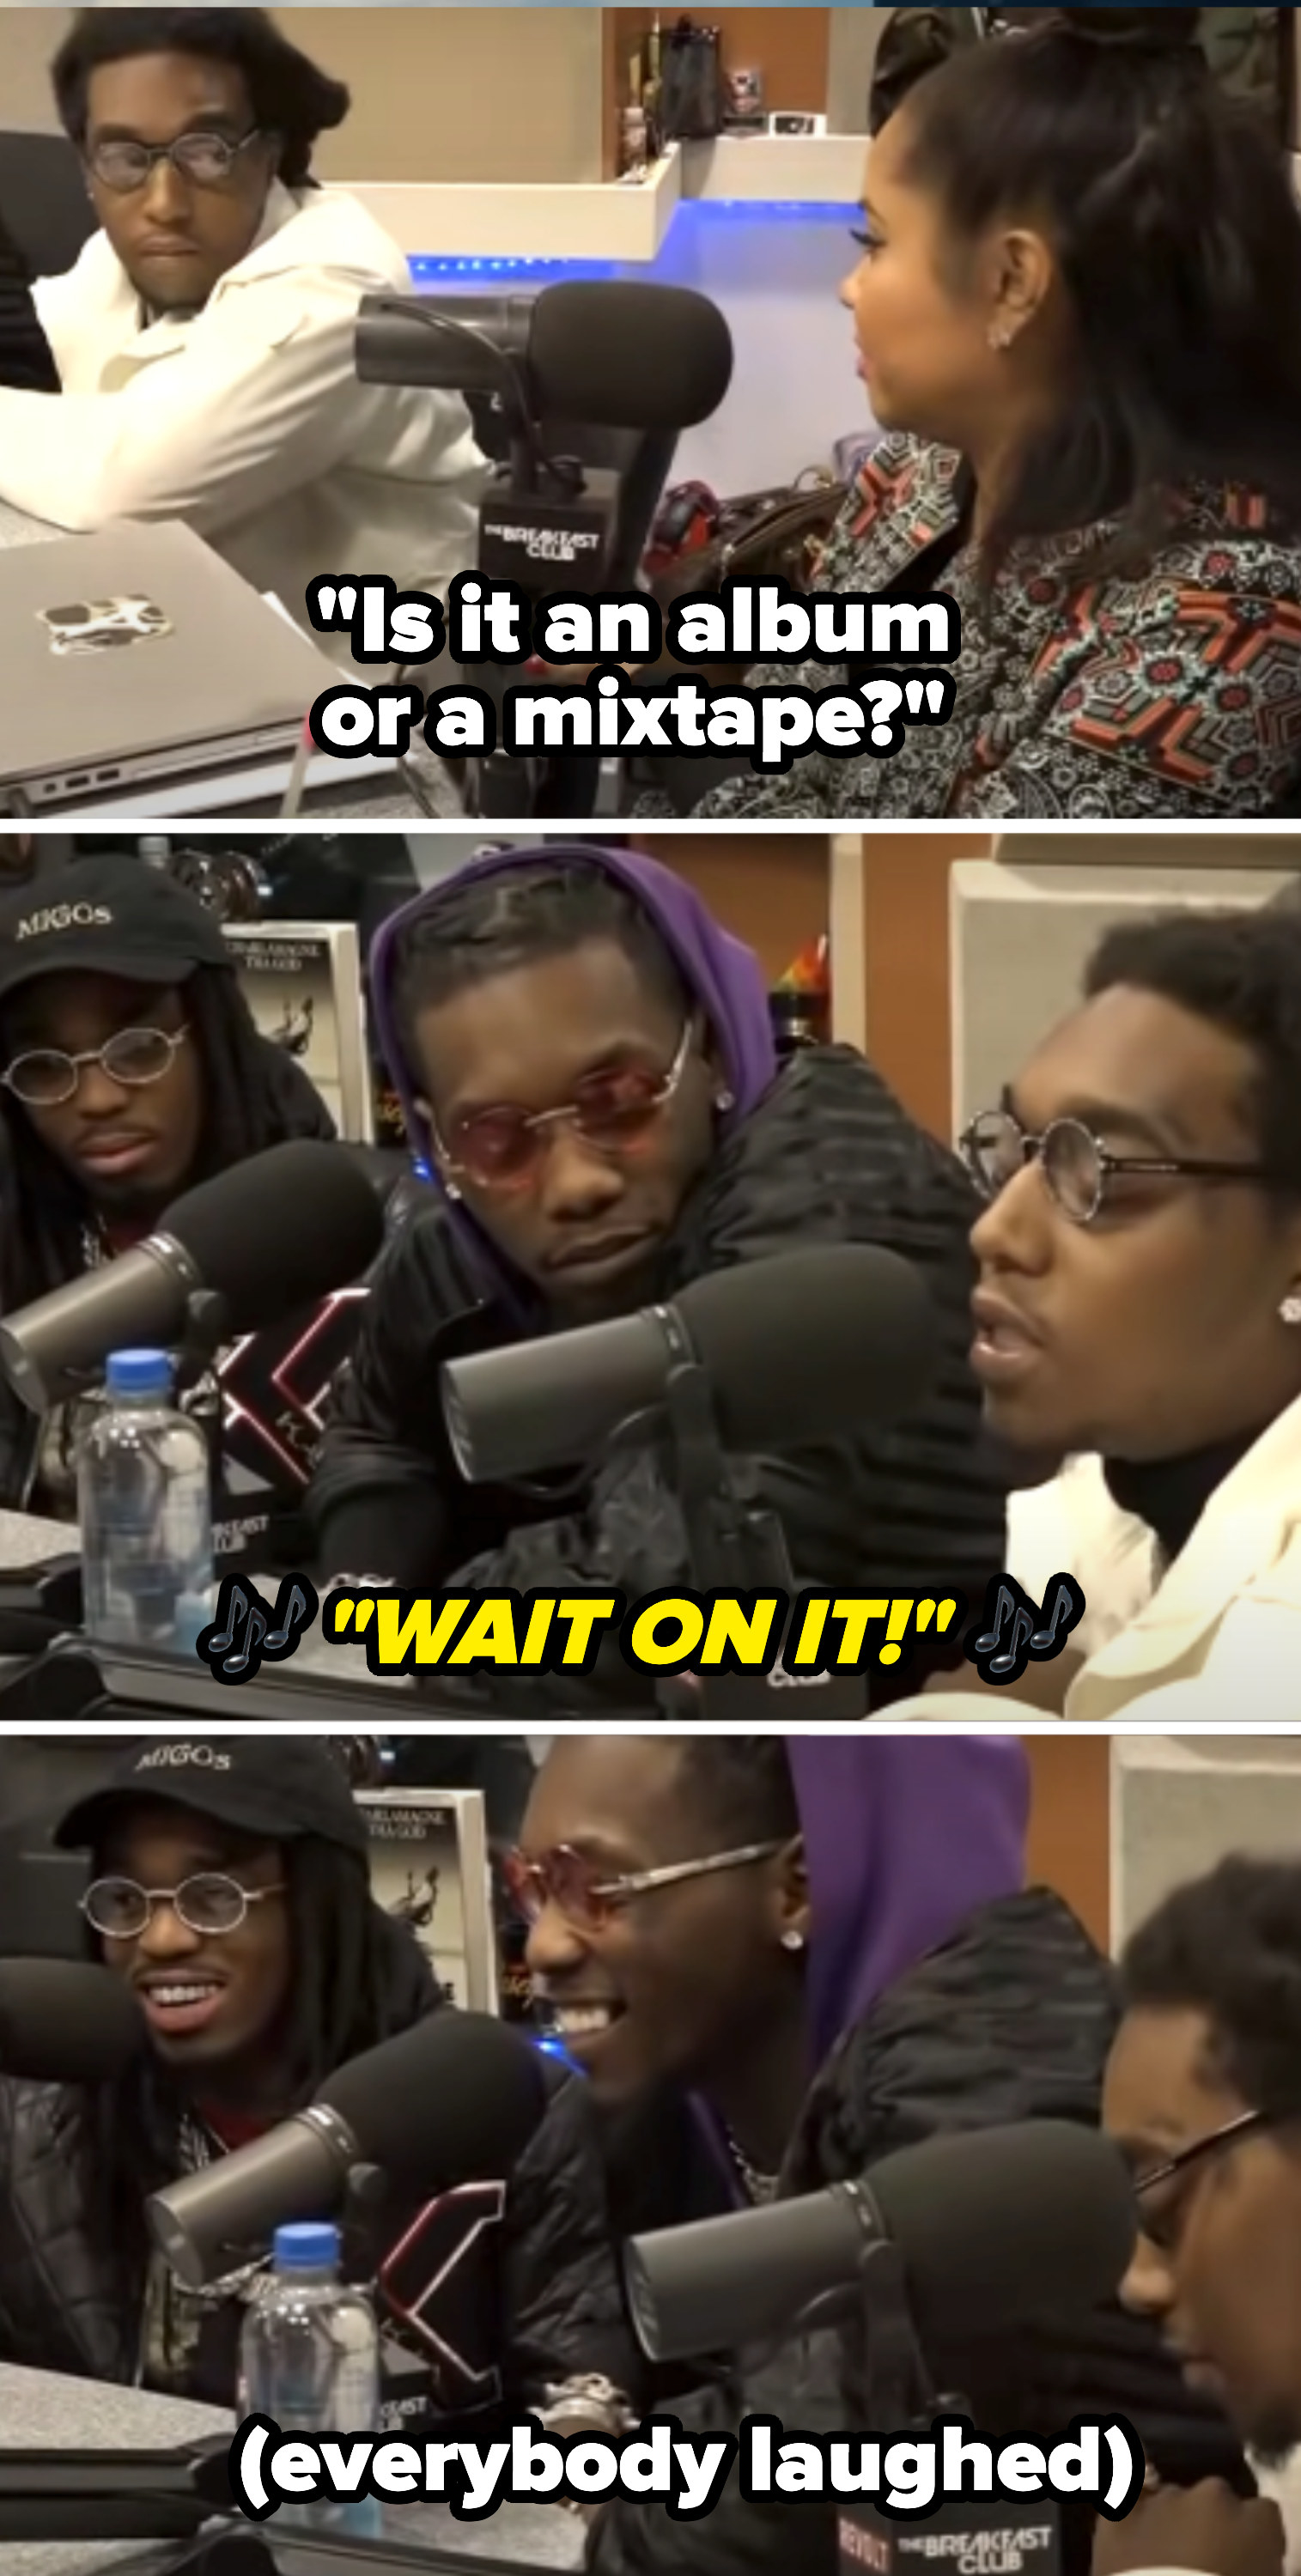 Angela asks if it&#x27;s an album or a mixtape, and Takeoff responds &quot;Wait on it&quot;